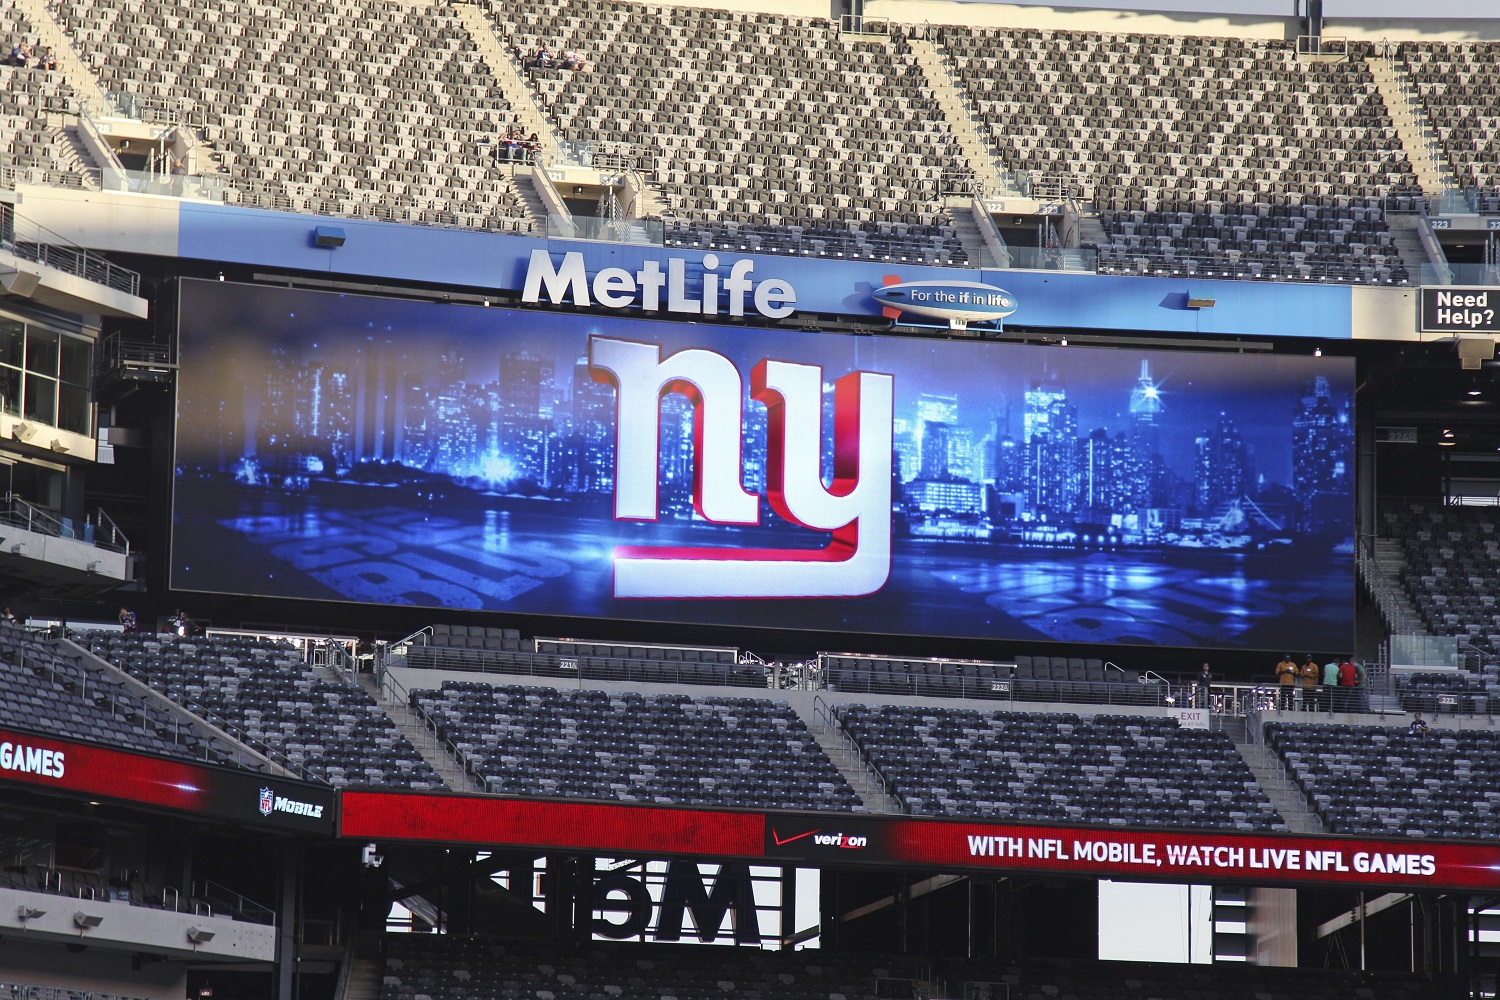 The MetLife logo is shown at MetLife Stadium before an NFL football game between the New York Giants and the Dallas Cowboys Wednesday, Sept. 5, 2012, in East Rutherford, N.J. (AP Photo/Seth Wenig)